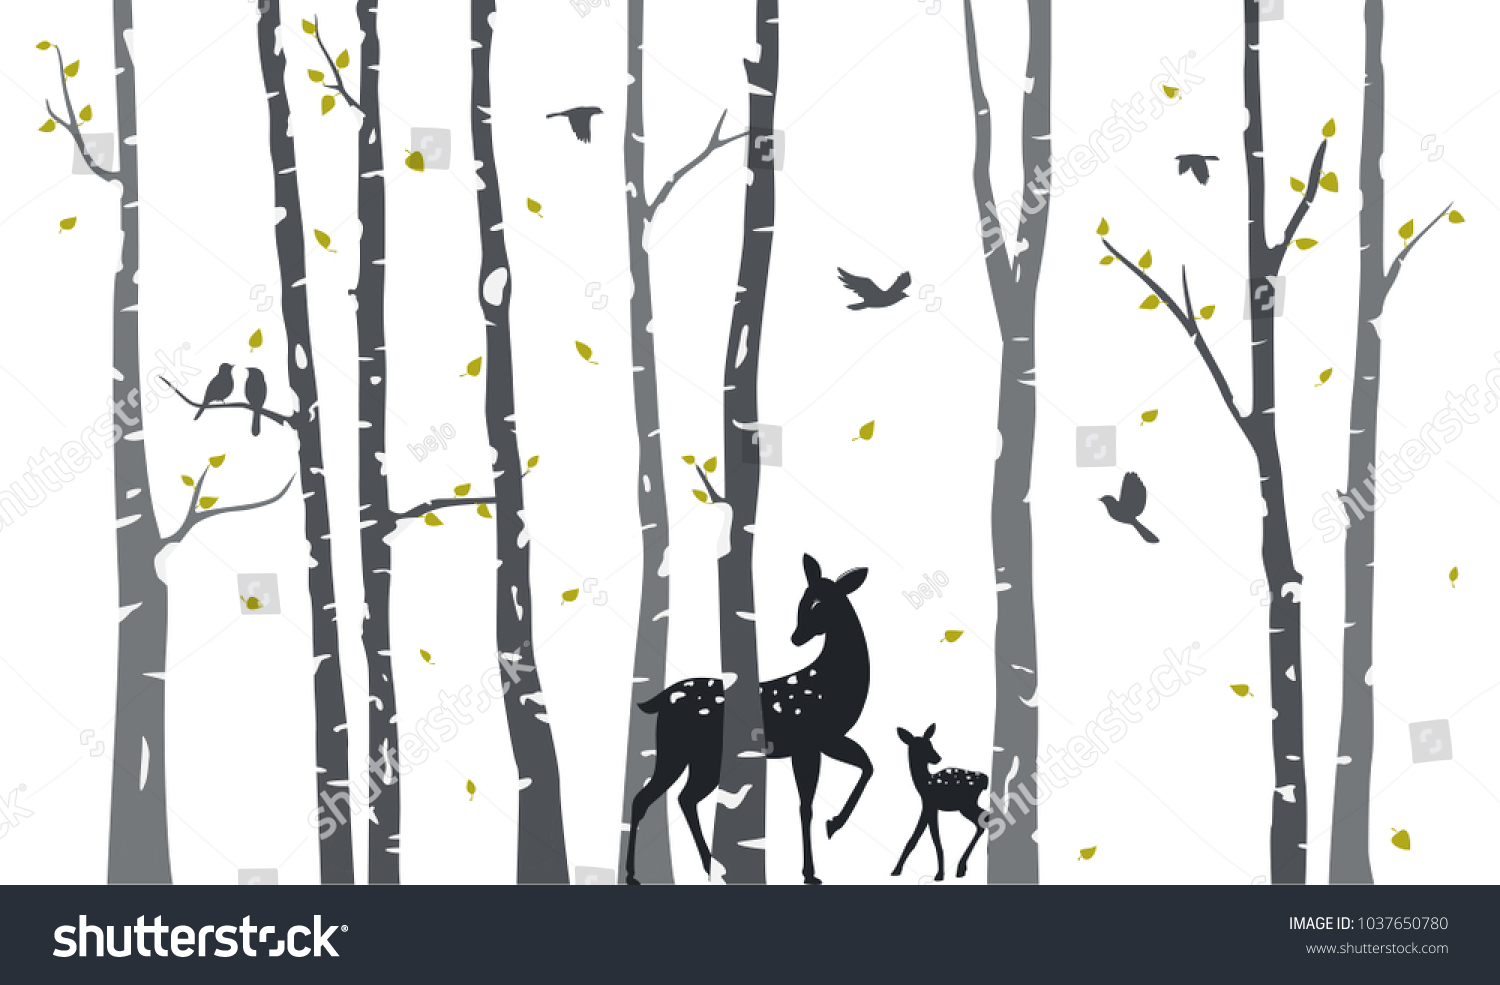 SVG of Birch Tree with deer and birds Silhouette Background svg